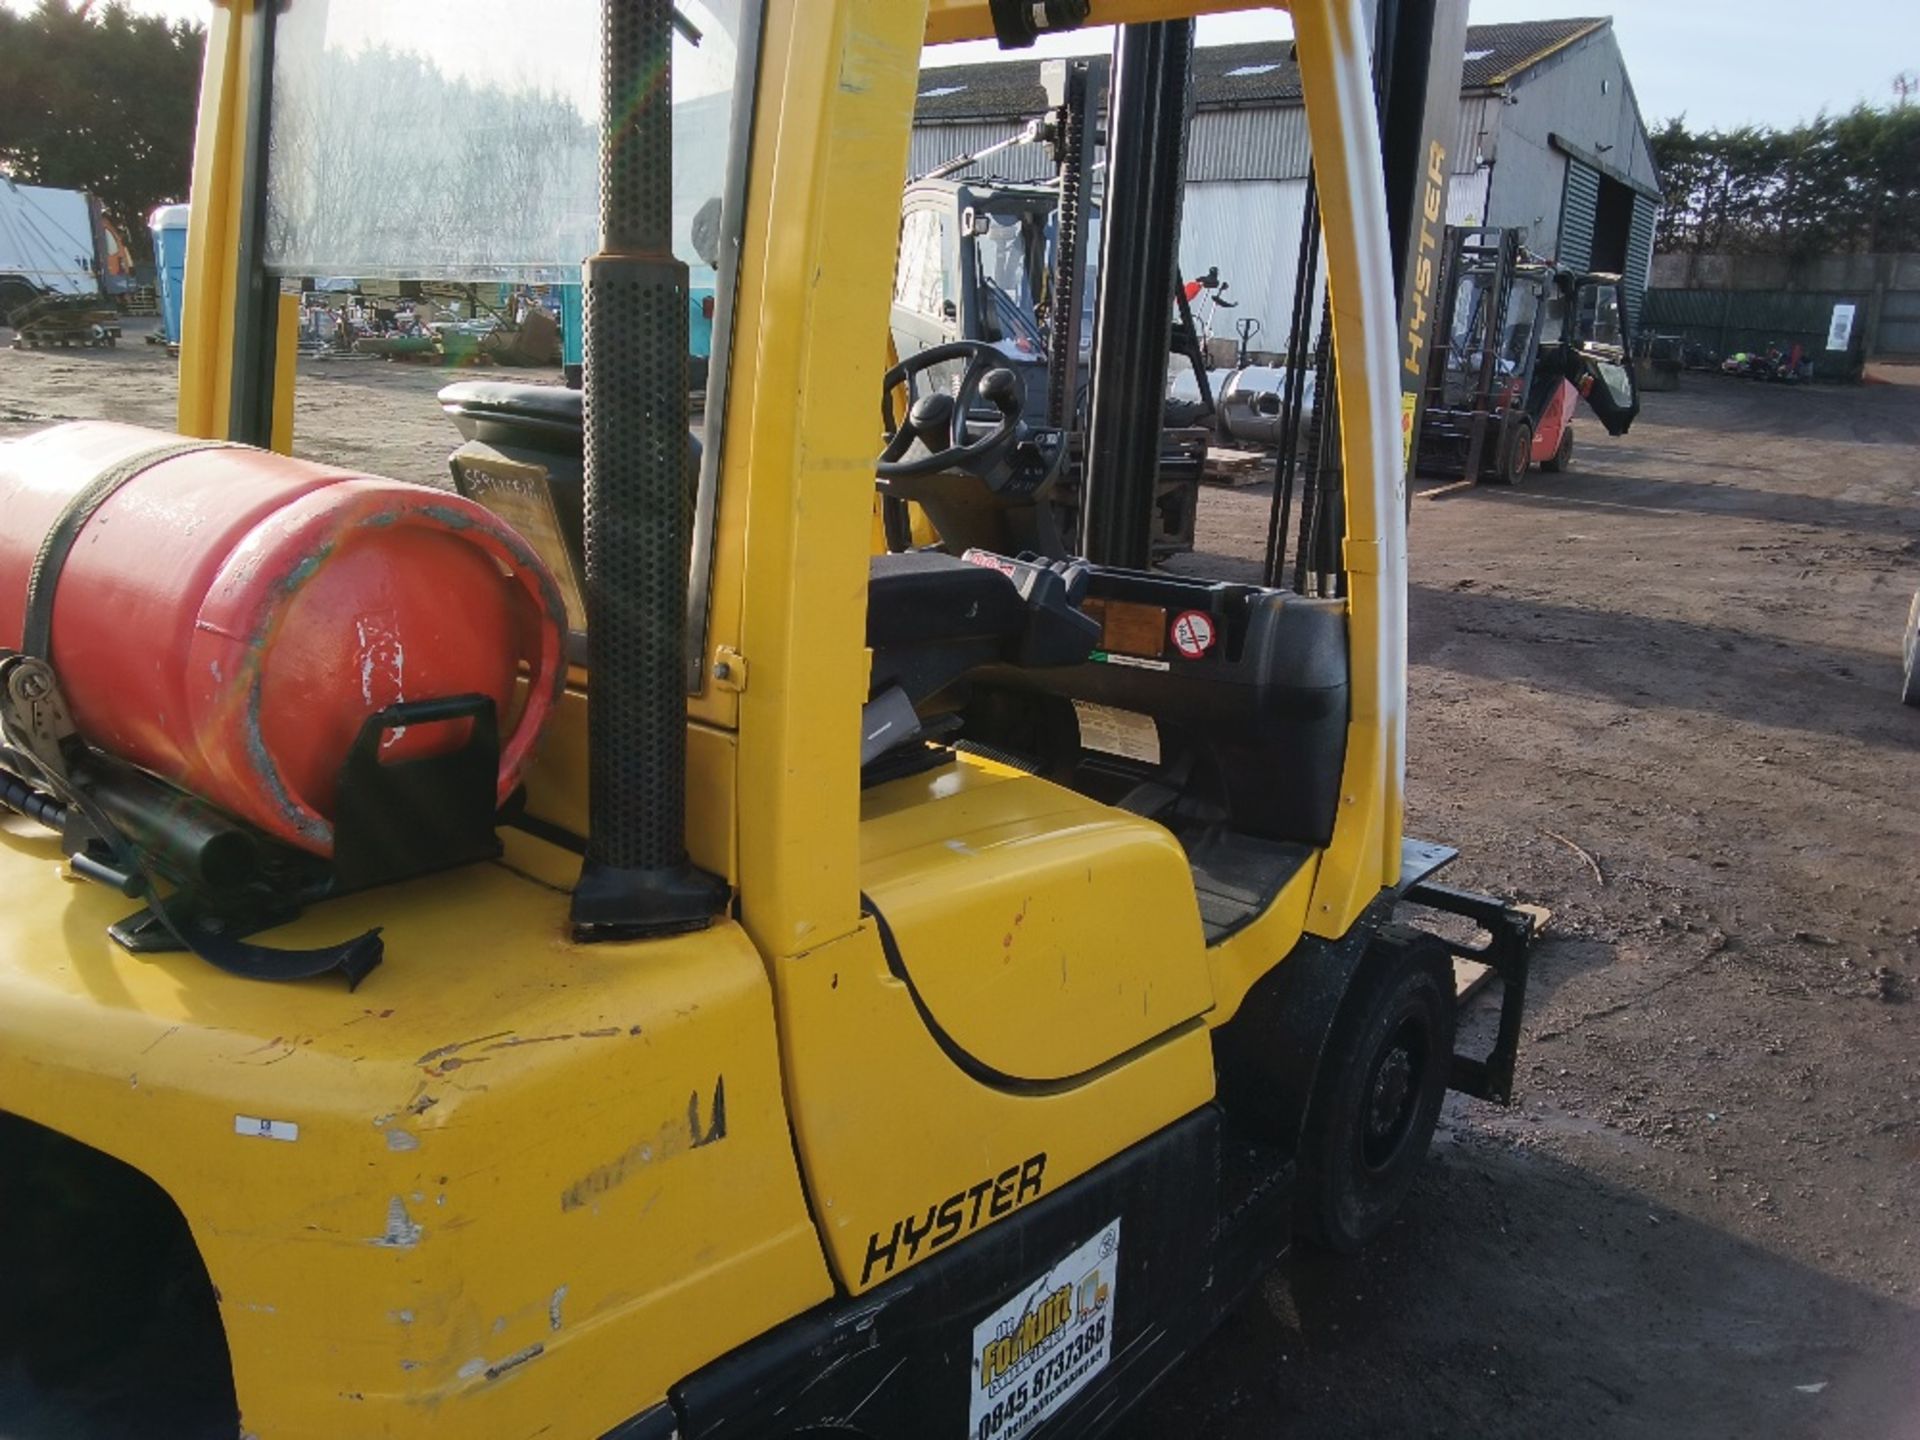 HYSTER 2.6 GAS POWERED FORKLIFT TRUCK WITH SIDE SHIFT. YEAR 2008. 2270KG RATED CAPACITY SOURCED FRO - Image 4 of 9